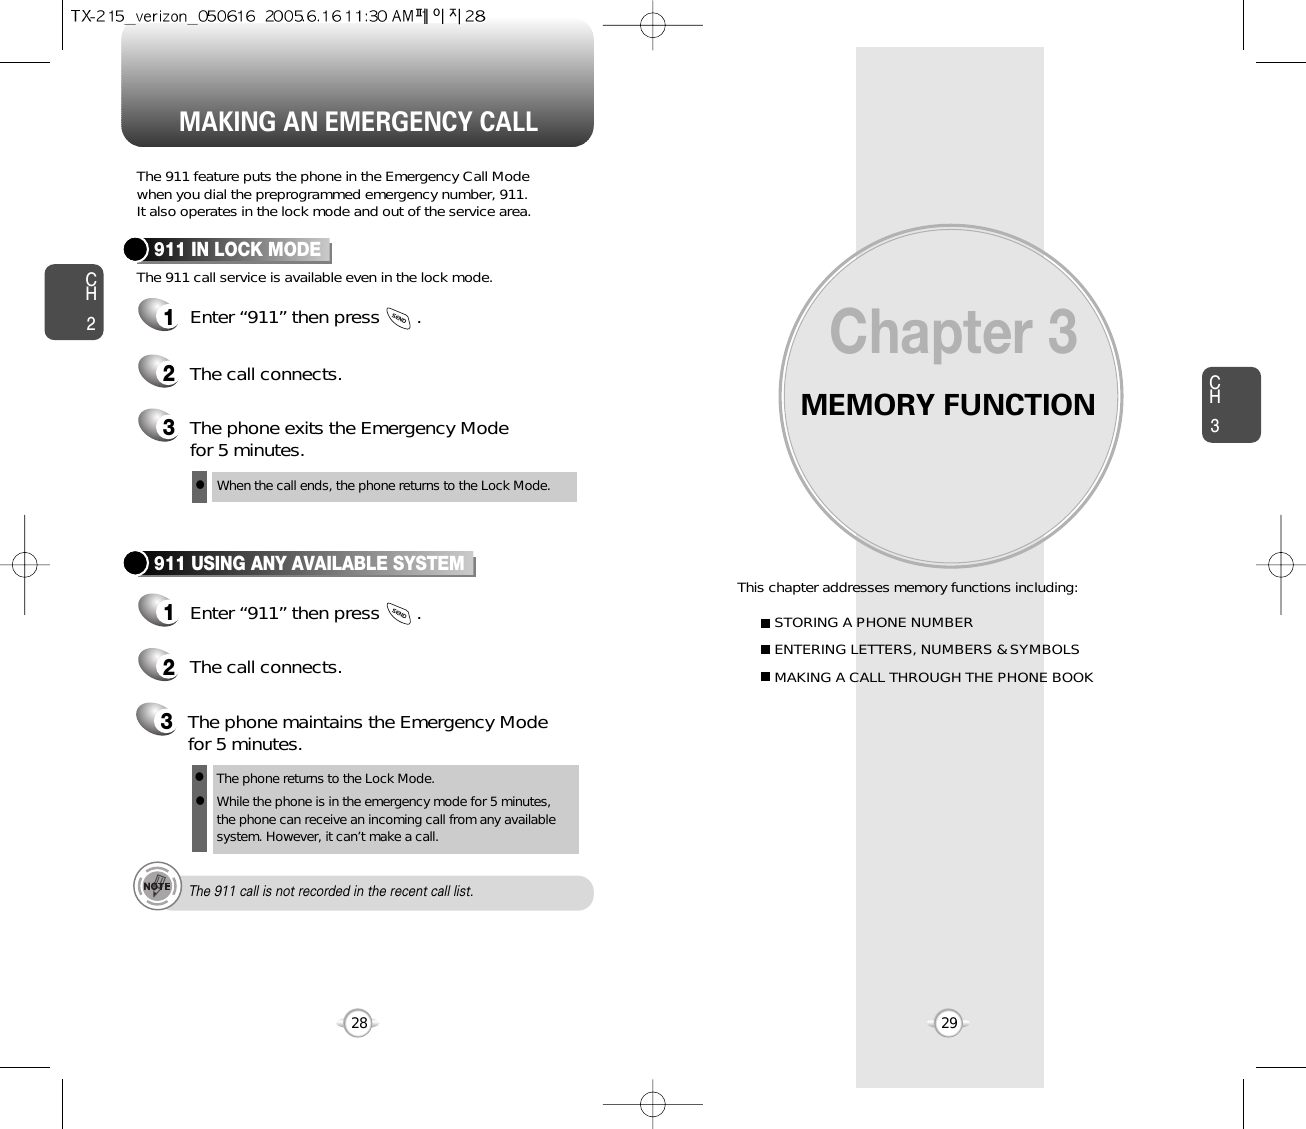 MEMORY FUNCTIONThis chapter addresses memory functions including:Chapter 3CH329MAKING AN EMERGENCY CALLCH228STORING A PHONE NUMBERENTERING LETTERS, NUMBERS &amp; SYMBOLSMAKING A CALL THROUGH THE PHONE BOOKThe 911 feature puts the phone in the Emergency Call Modewhen you dial the preprogrammed emergency number, 911. It also operates in the lock mode and out of the service area.The 911 call service is available even in the lock mode.911 IN LOCK MODE1Enter “911” then press       .When the call ends, the phone returns to the Lock Mode.2The call connects.3The phone exits the Emergency Mode for 5 minutes.911 USING ANY AVAILABLE SYSTEM1Enter “911” then press       .The phone returns to the Lock Mode.While the phone is in the emergency mode for 5 minutes,the phone can receive an incoming call from any availablesystem. However, it can’t make a call.2The call connects.3The phone maintains the Emergency Modefor 5 minutes.lllThe 911 call is not recorded in the recent call list.